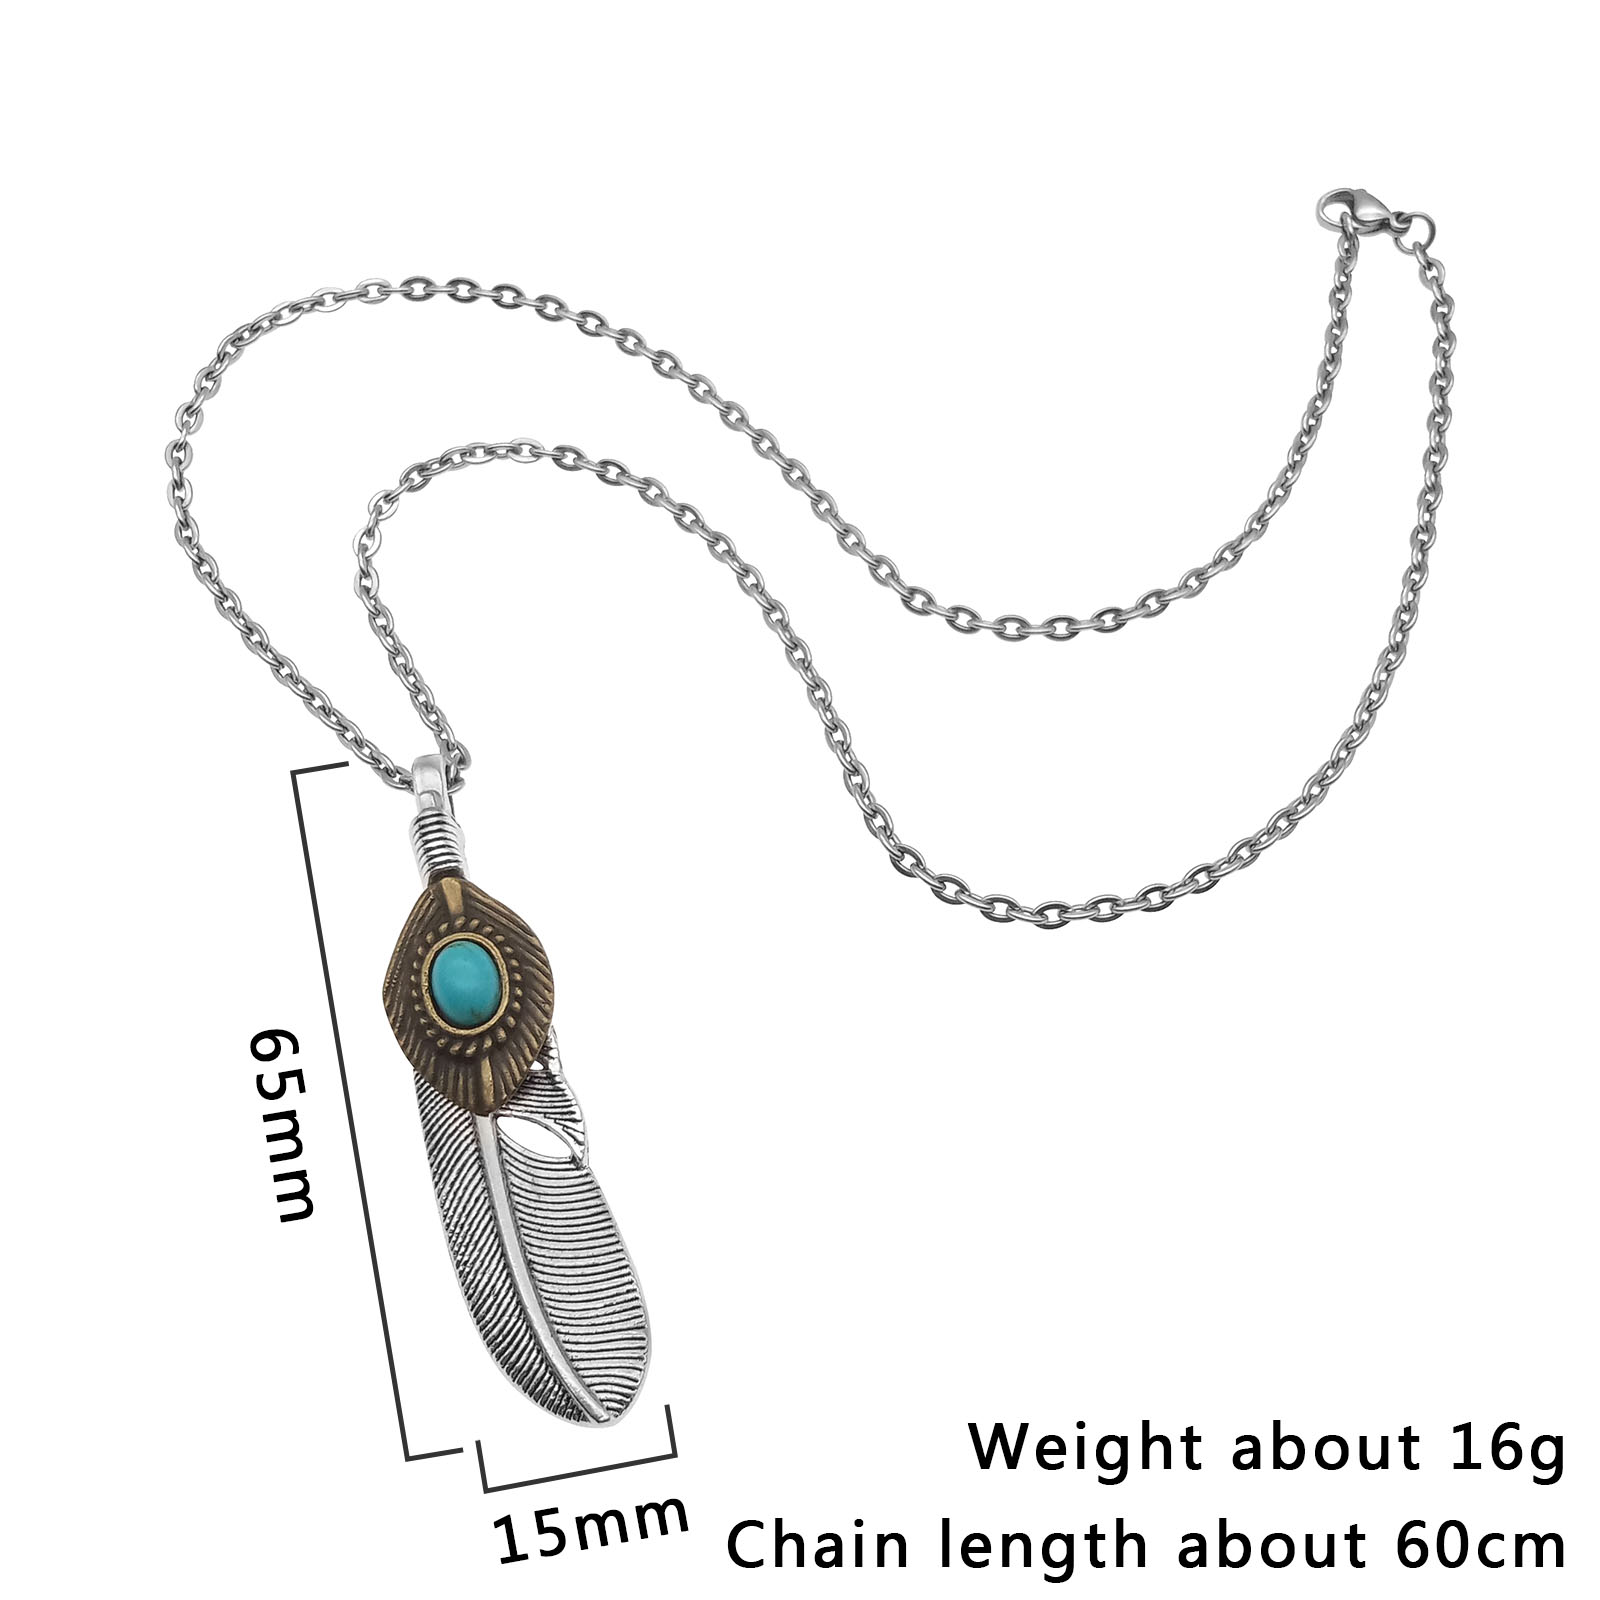 The pendant is about 15mm long, about 65mm high, and the chain is about 60cm long